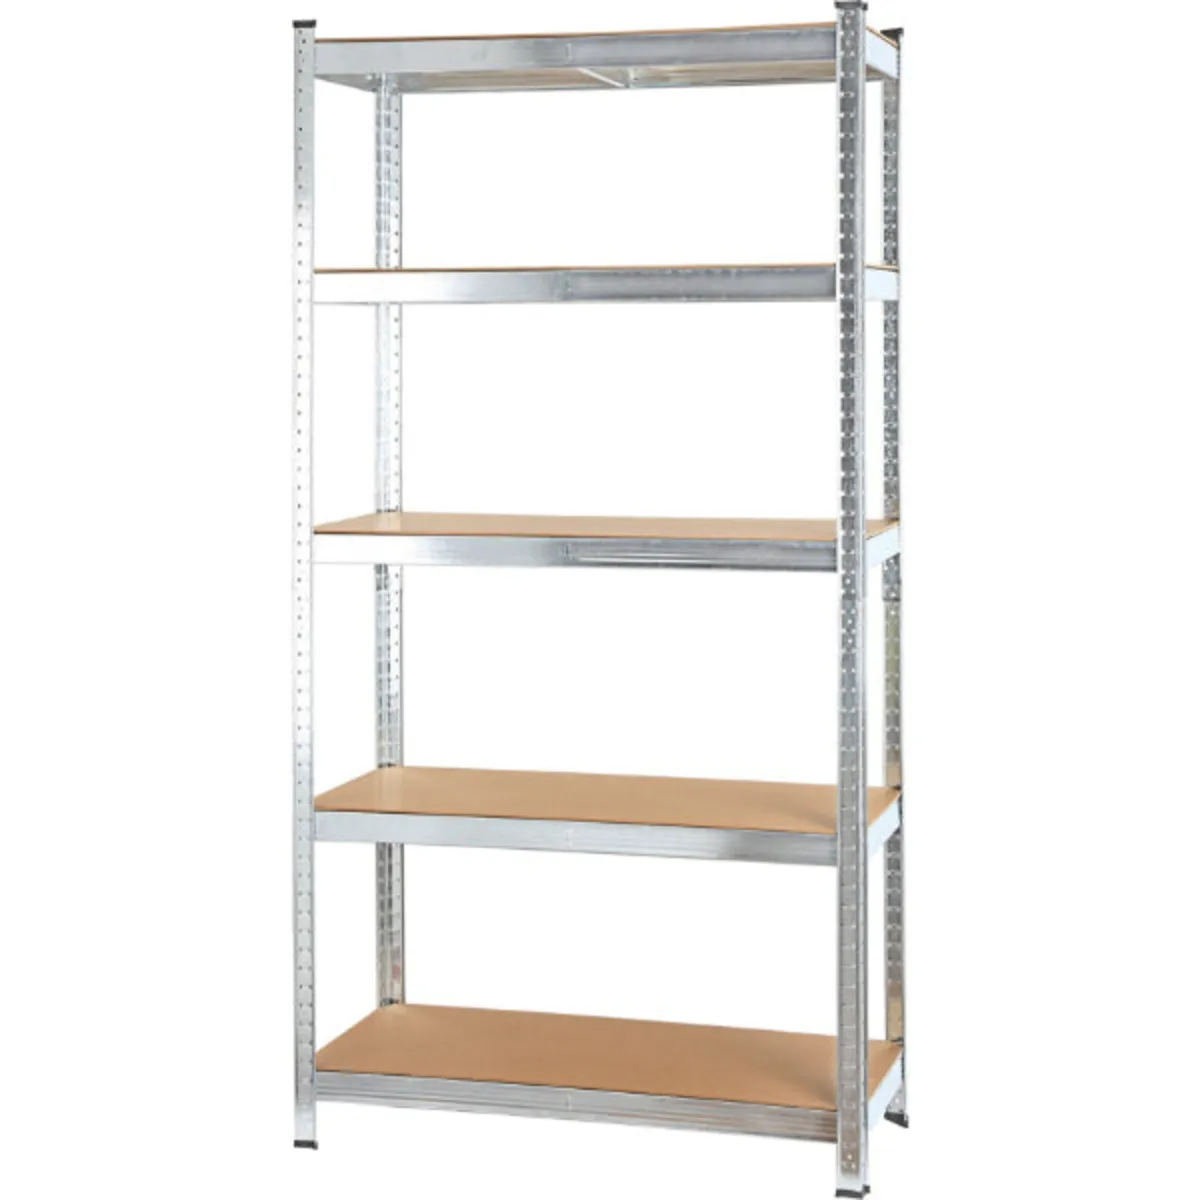 TOOLS HEAVY DUTY SHELVING WITH MDF BOARD